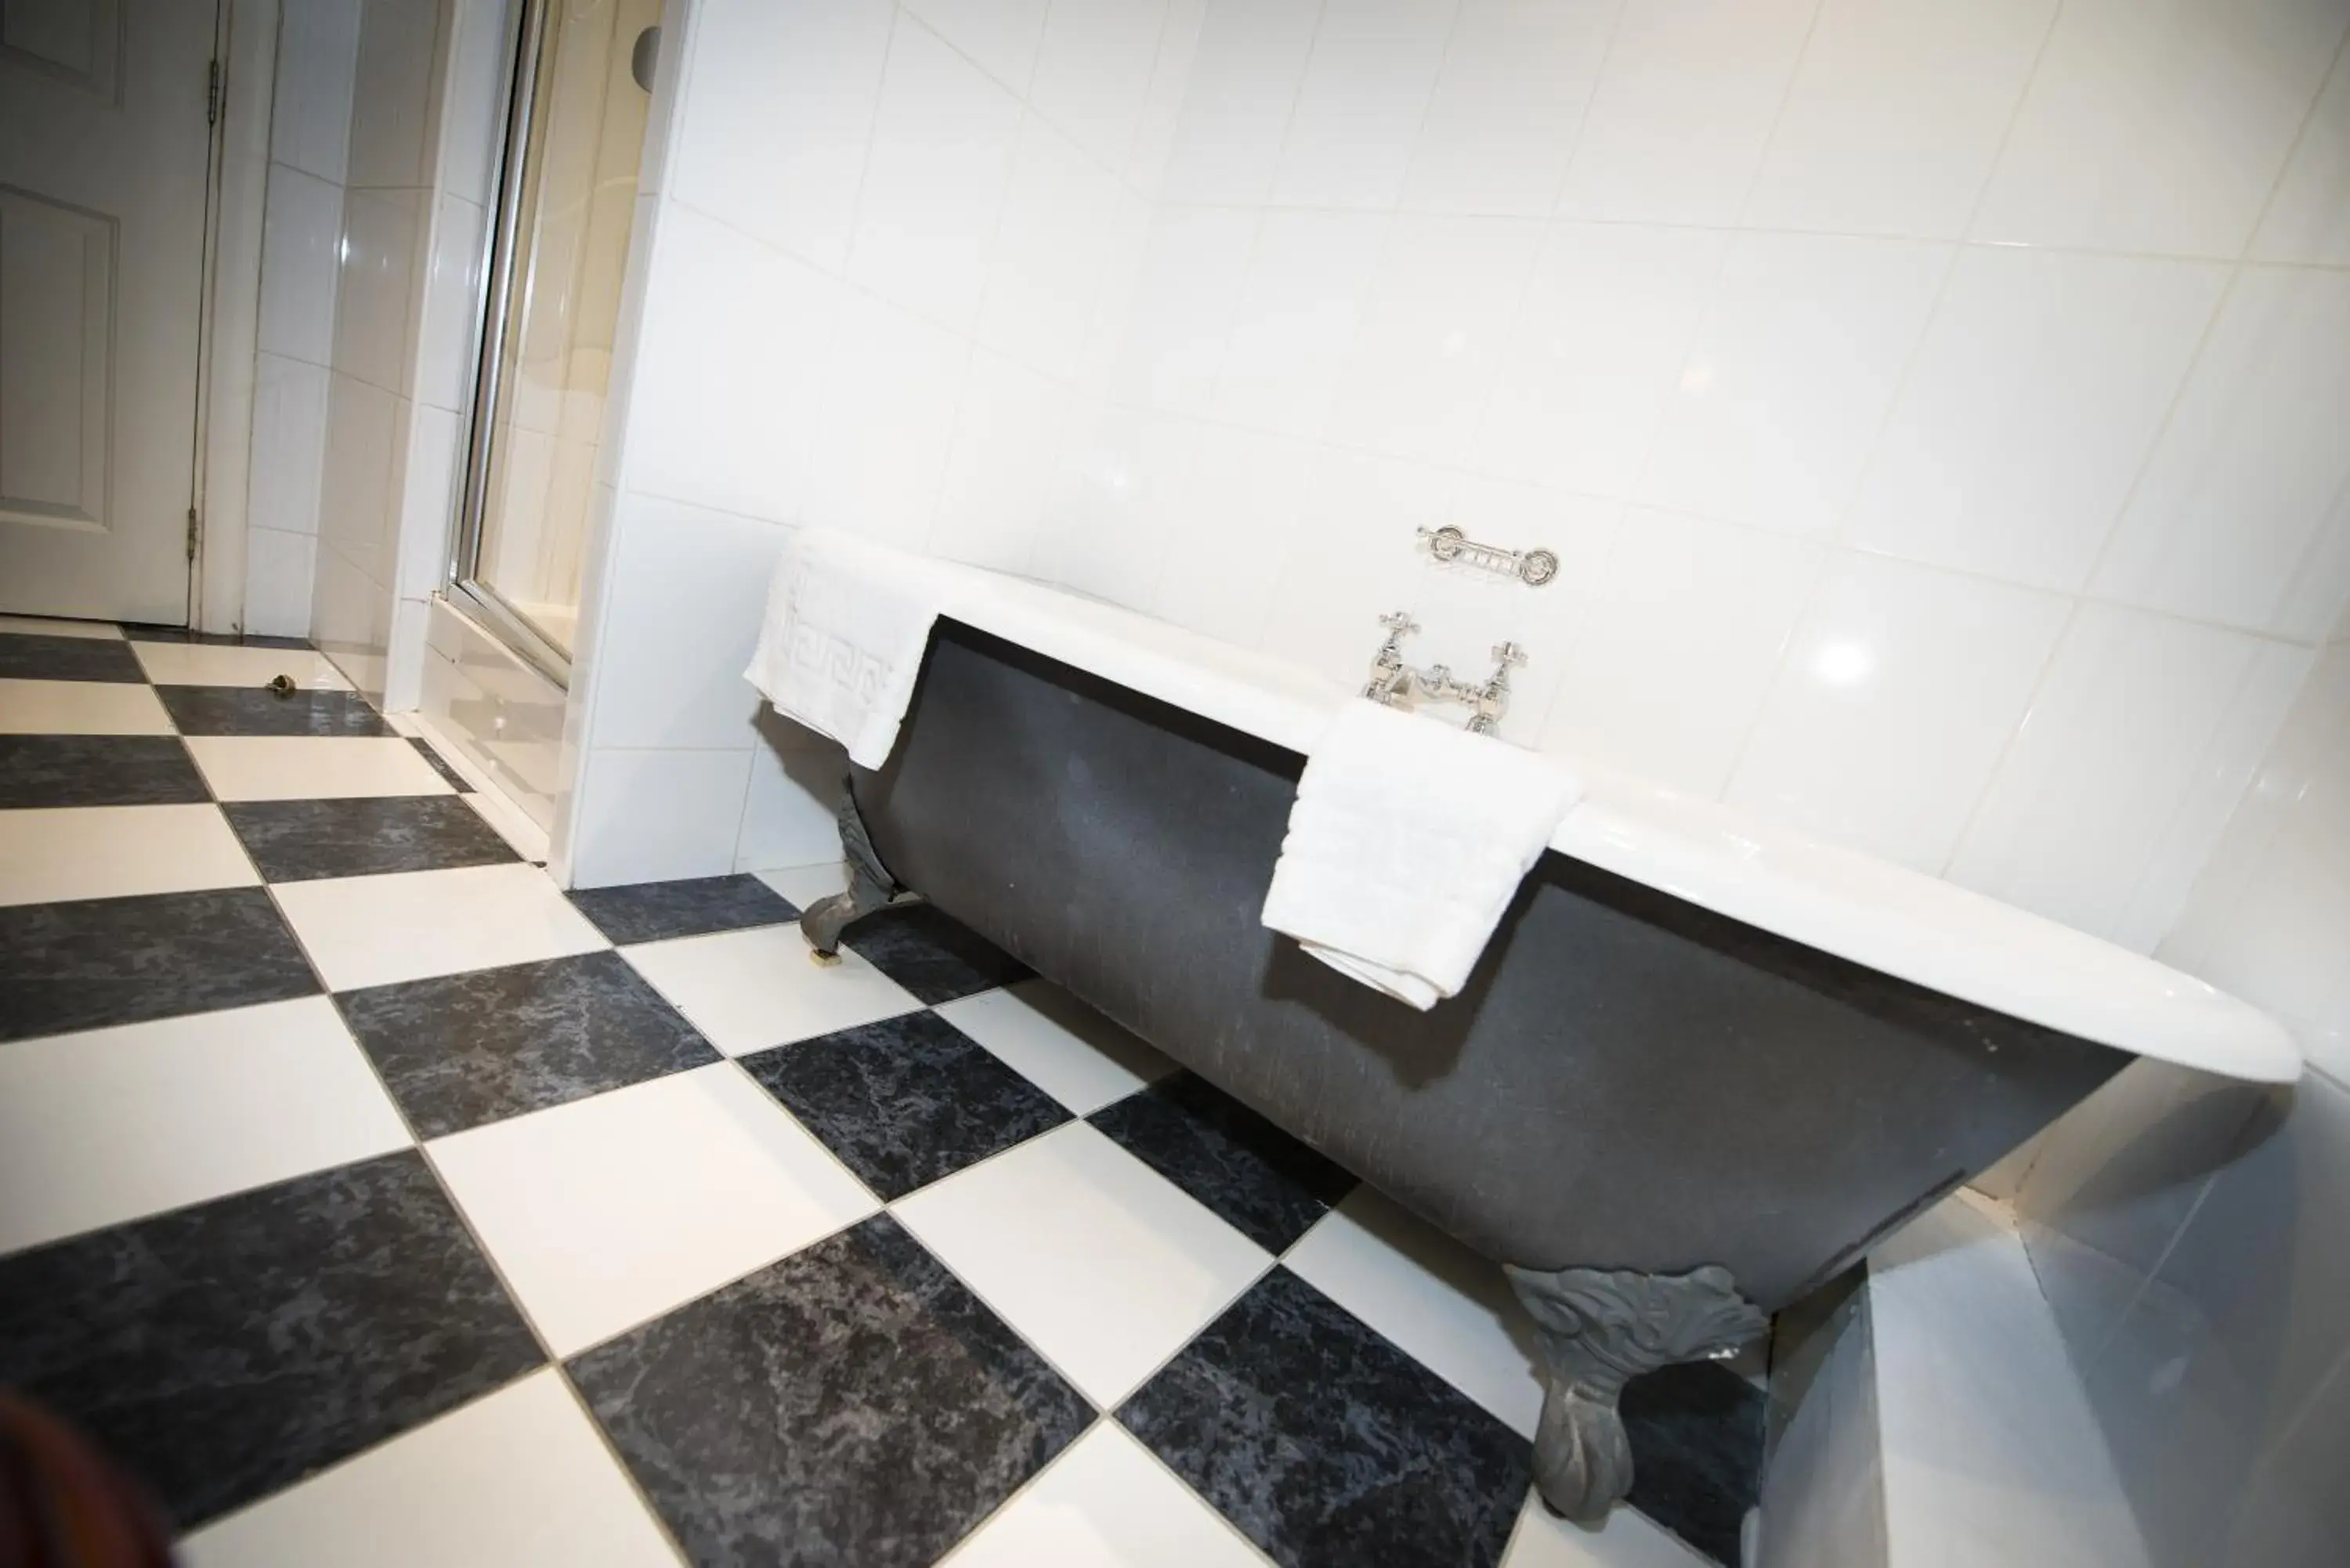 Bathroom in Columba Hotel Inverness by Compass Hospitality